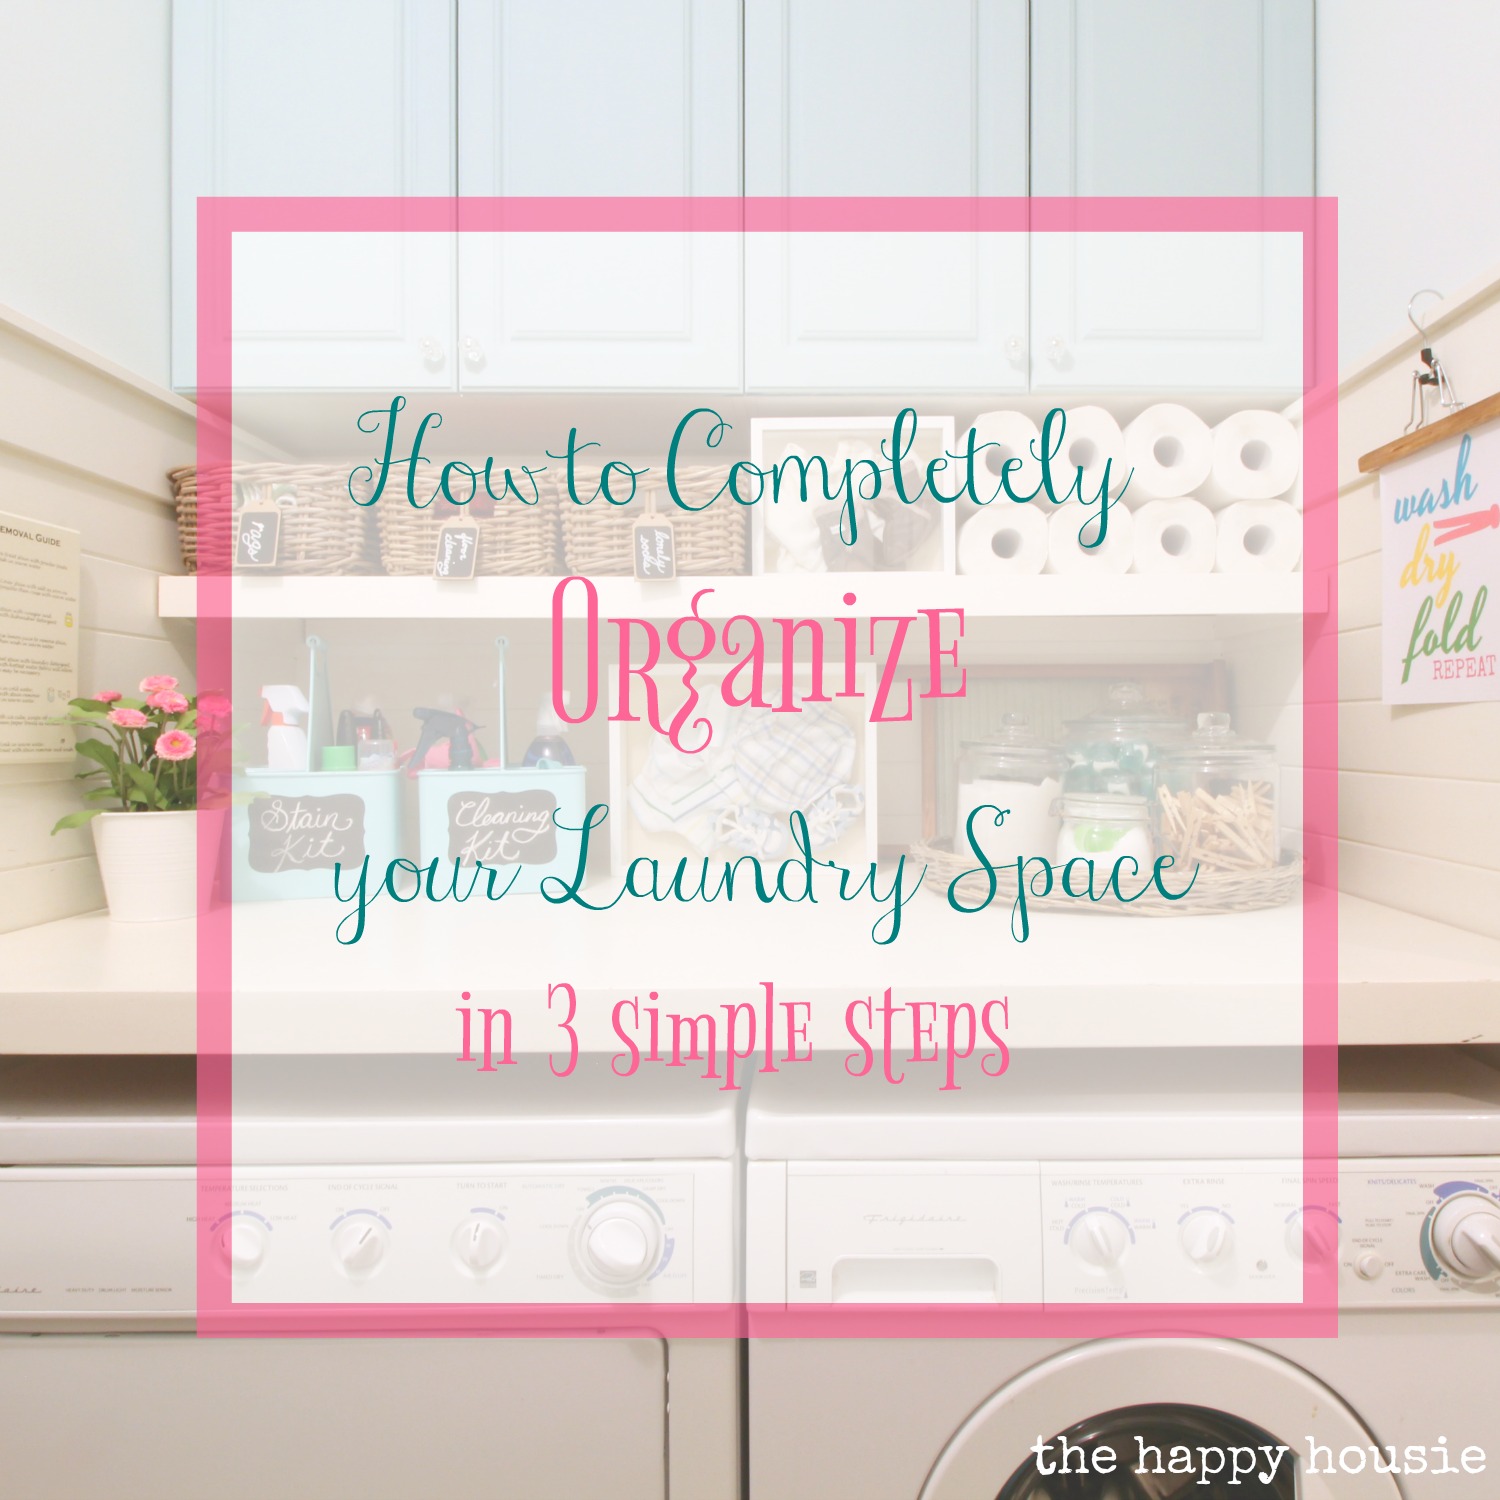 https://www.thehappyhousie.com/wp-content/uploads/2017/02/How-to-Completely-Organize-Your-Laundry-Space-in-3-simple-steps-Week-3-of-the-Ten-Week-Organizing-Challenge-at-the-happy-housie-2.jpg